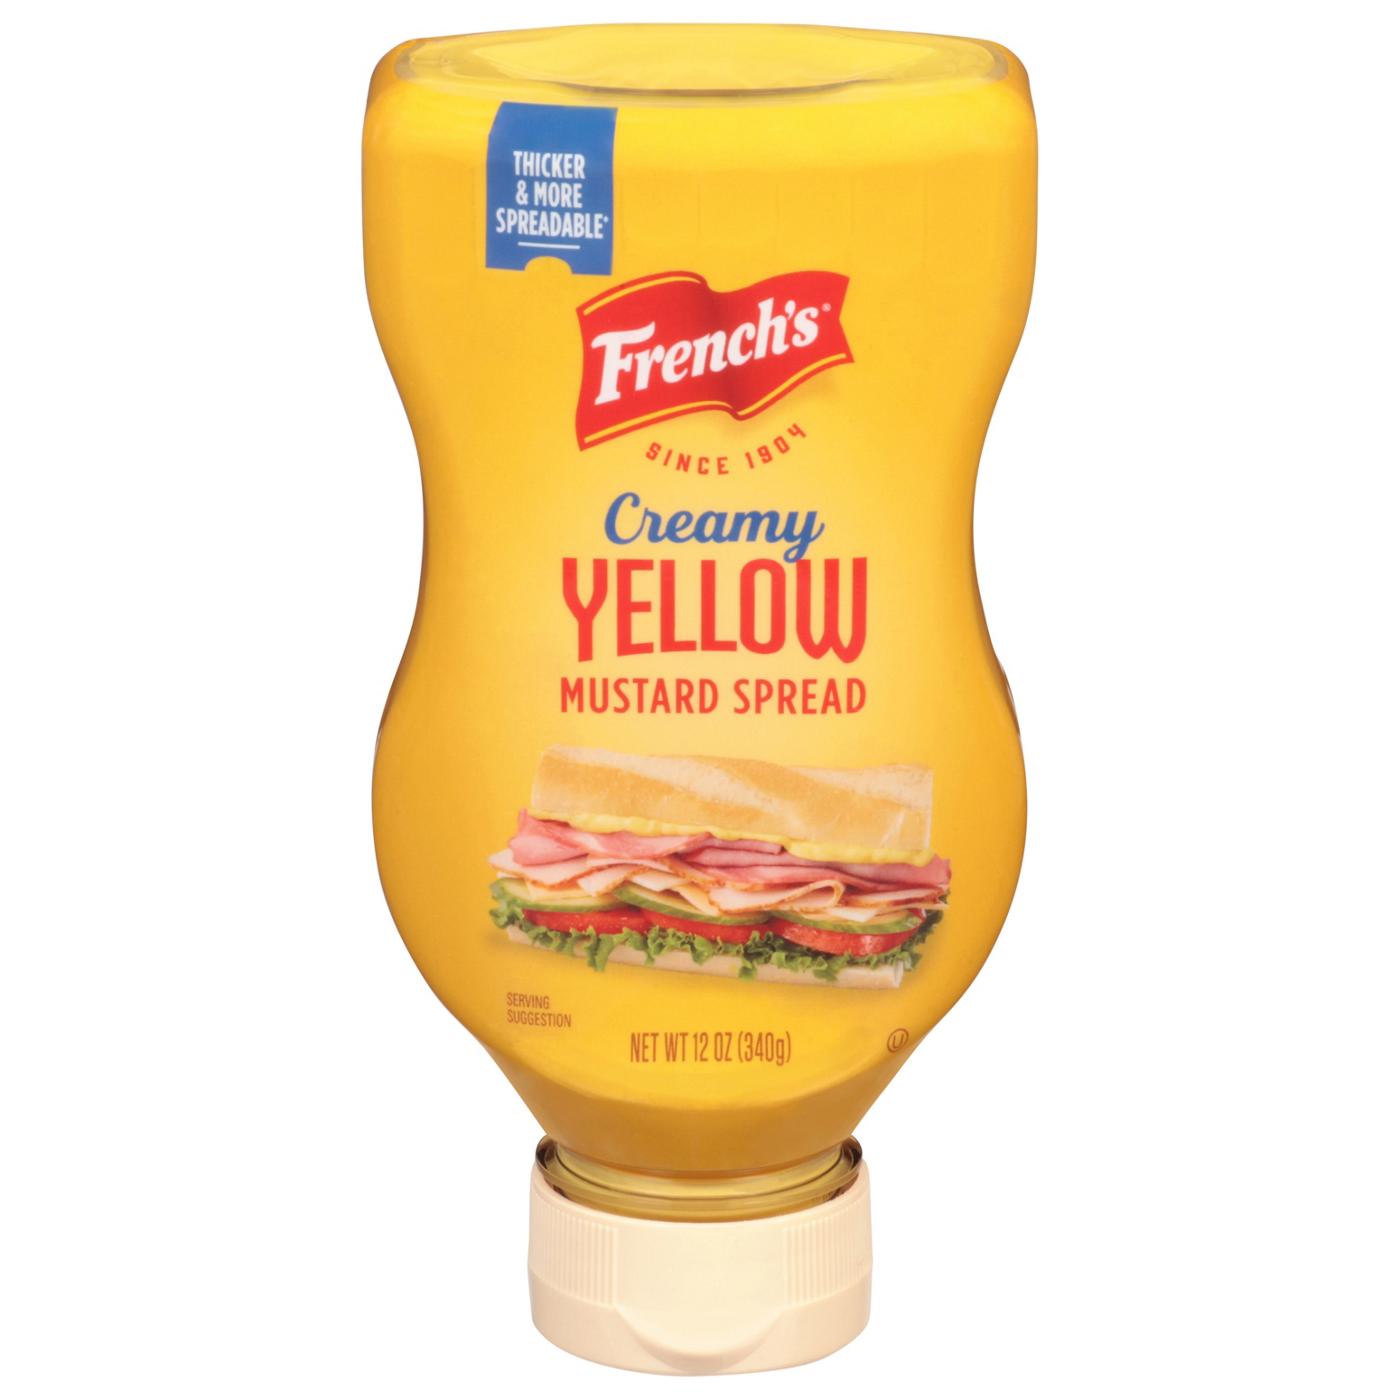 French's Creamy Yellow Mustard Spread; image 1 of 9